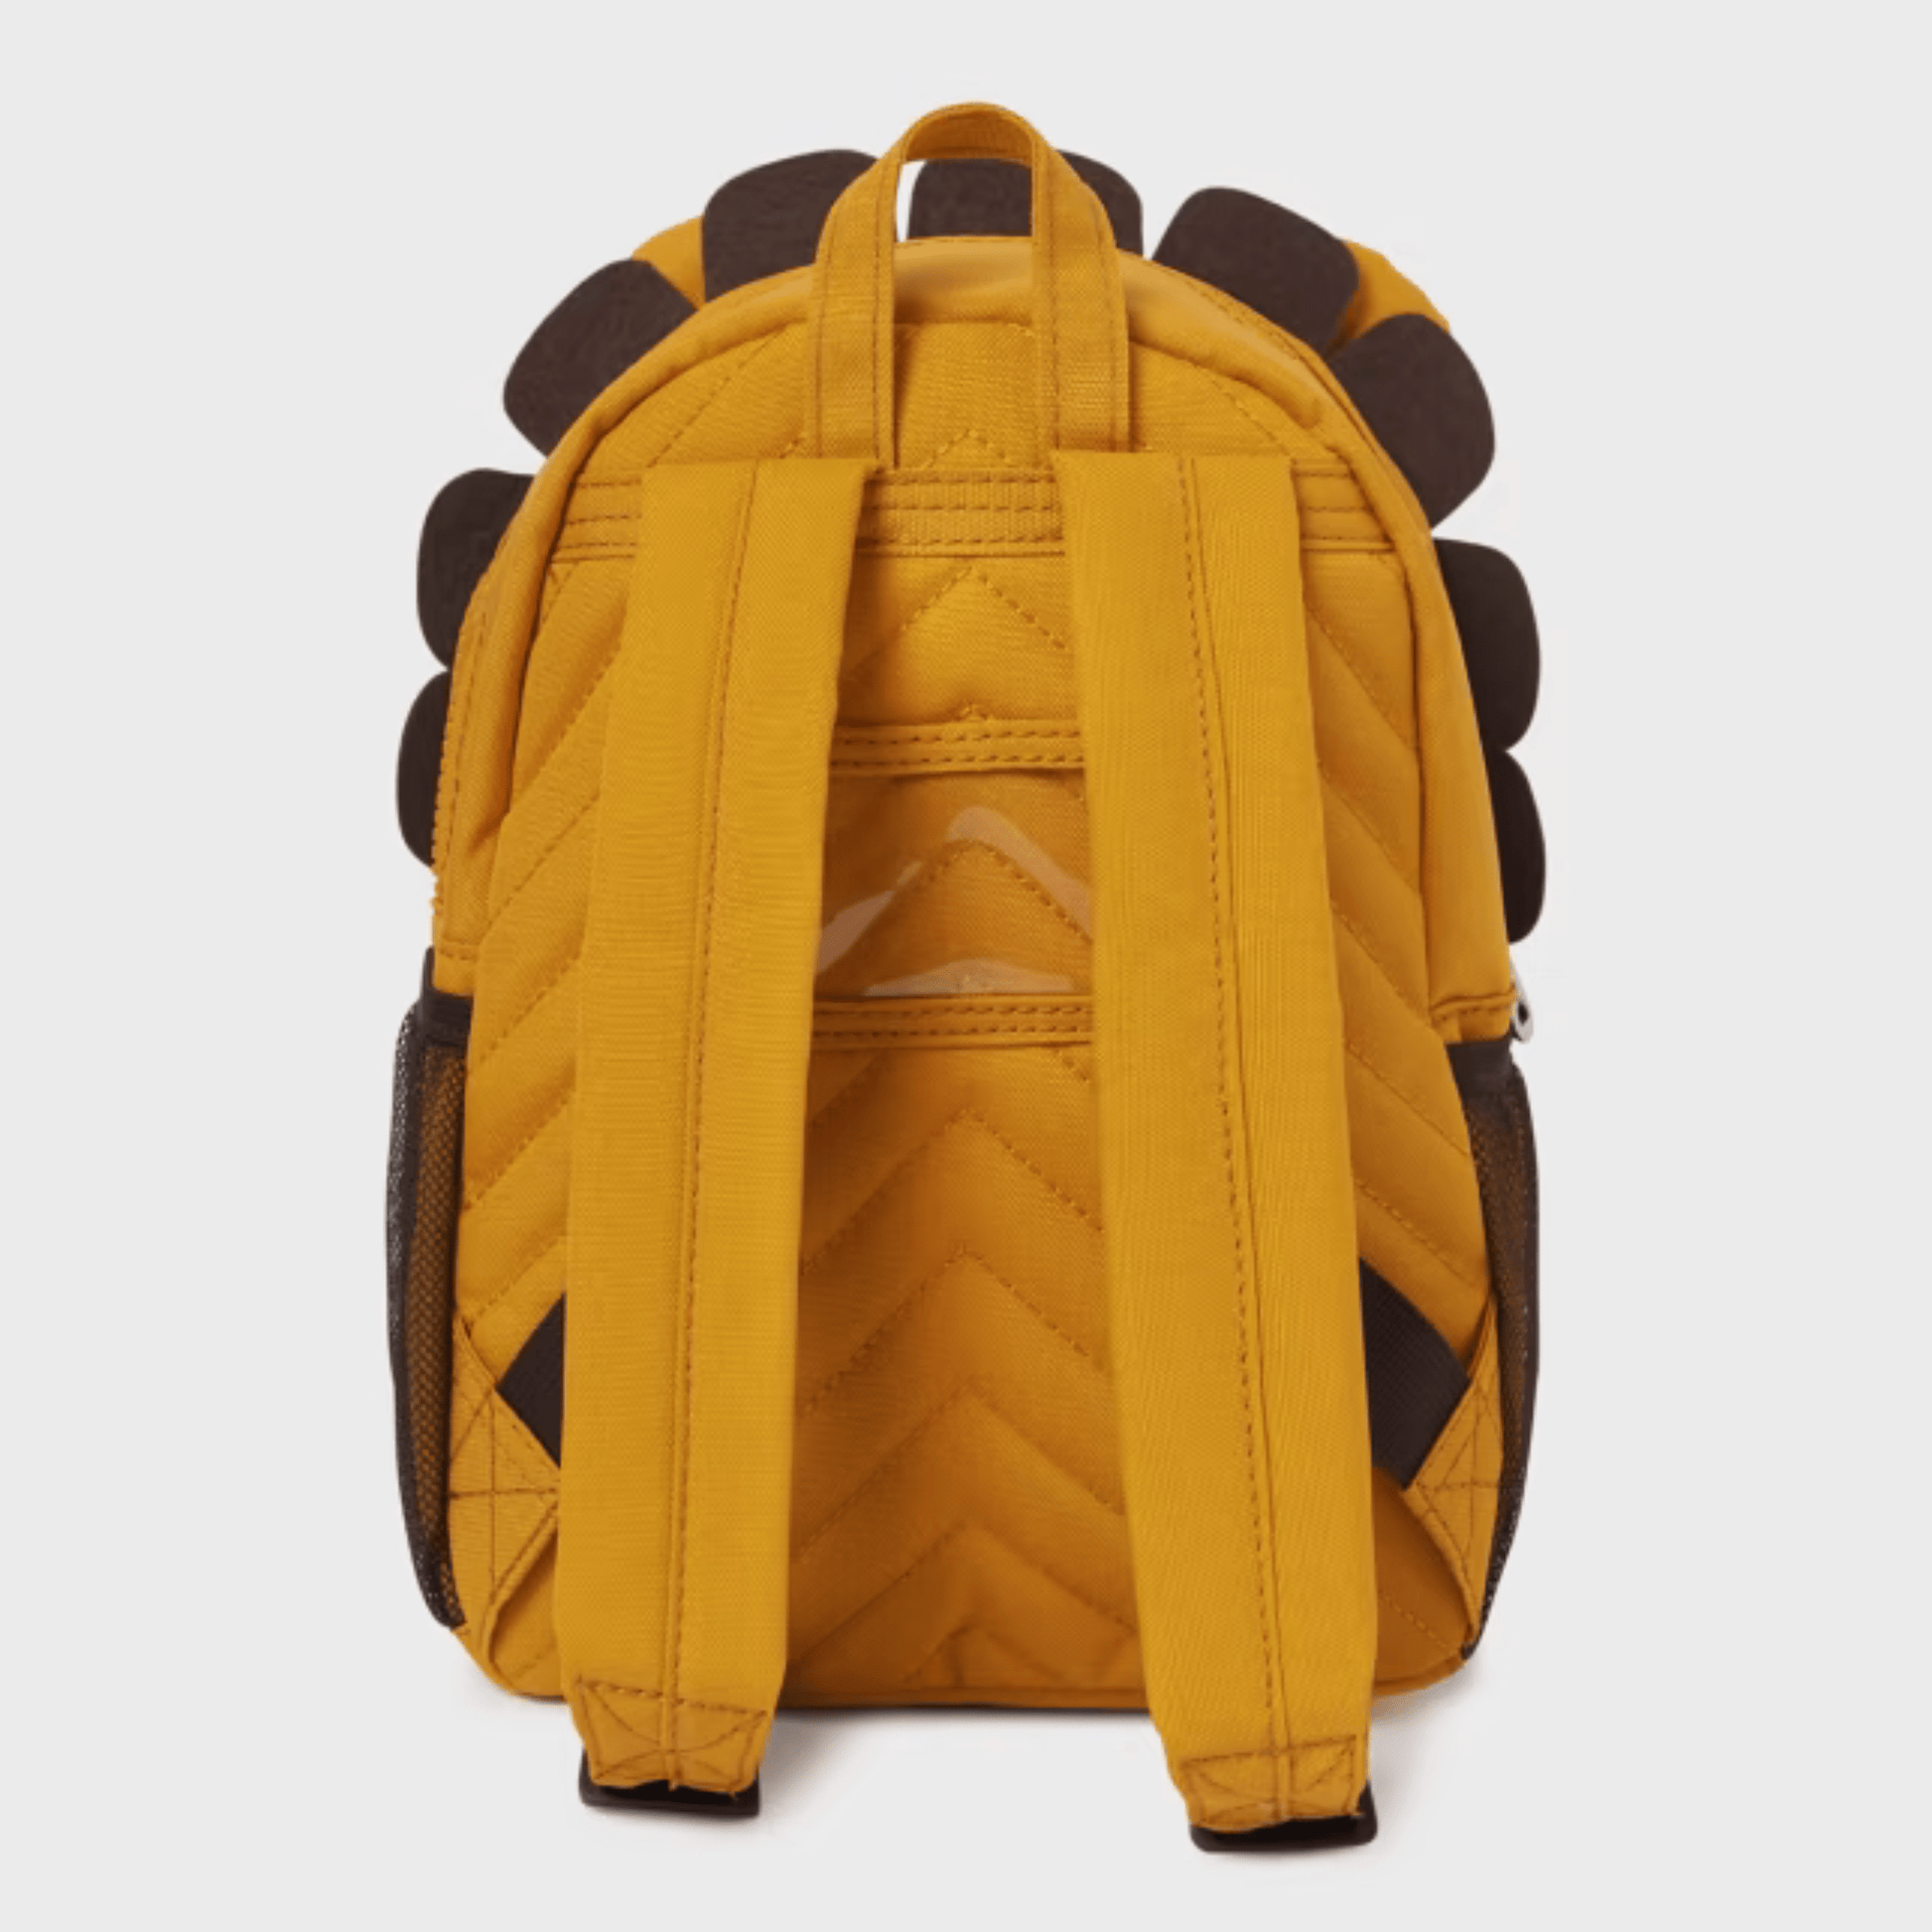 Mayoral Backpacks Backpack Little Lion - Yellow